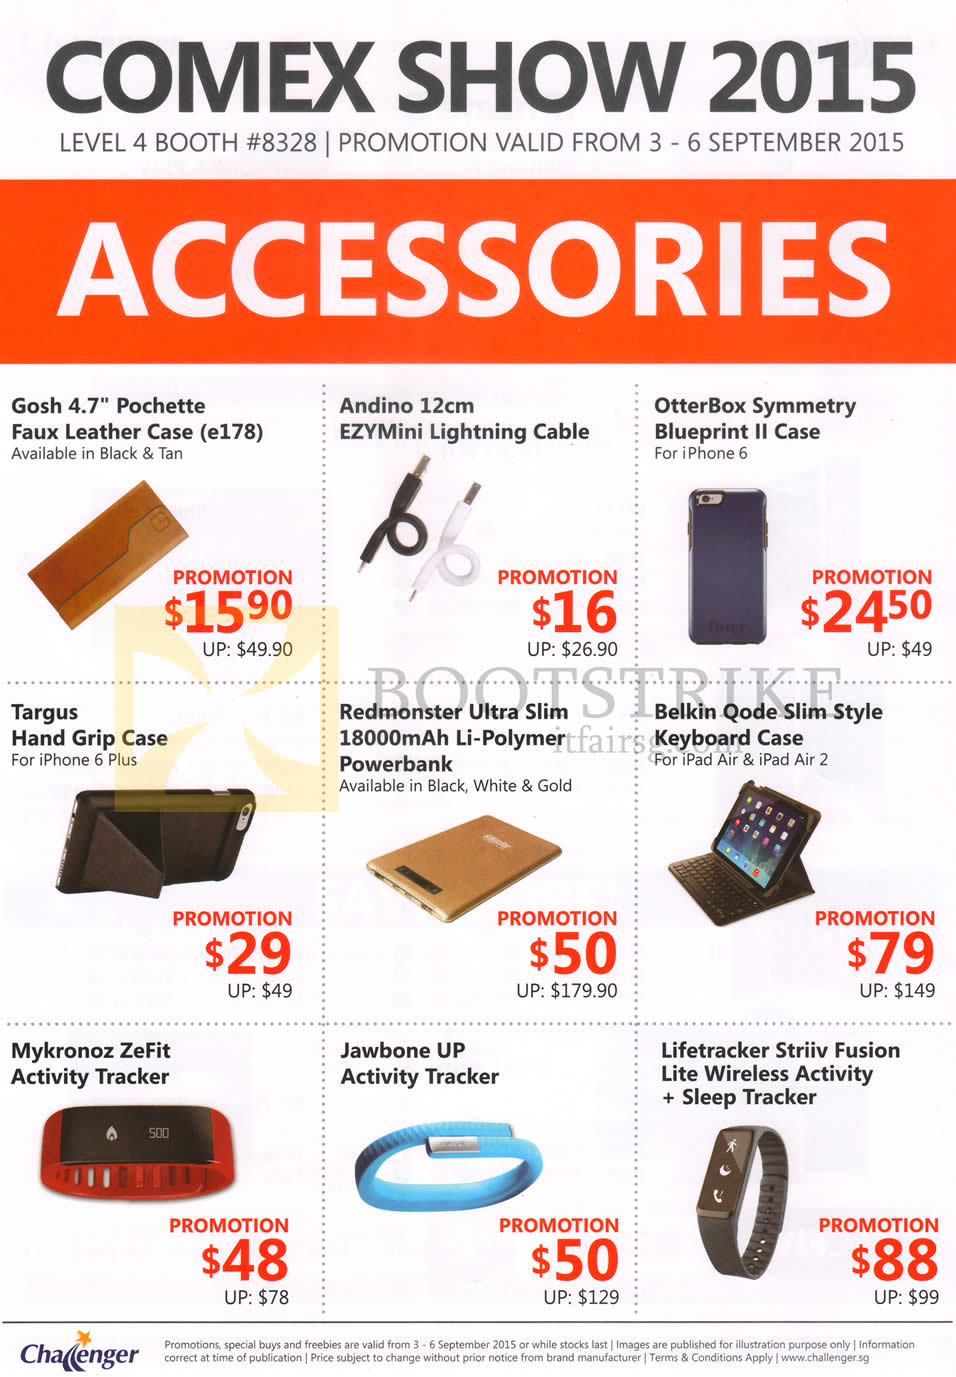 COMEX 2015 price list image brochure of Challenger Accessories Leather Case, Lightning Cable, Keyboard Case, PowerBank, HandGrip Case, Activity Tracker, Lifetracker